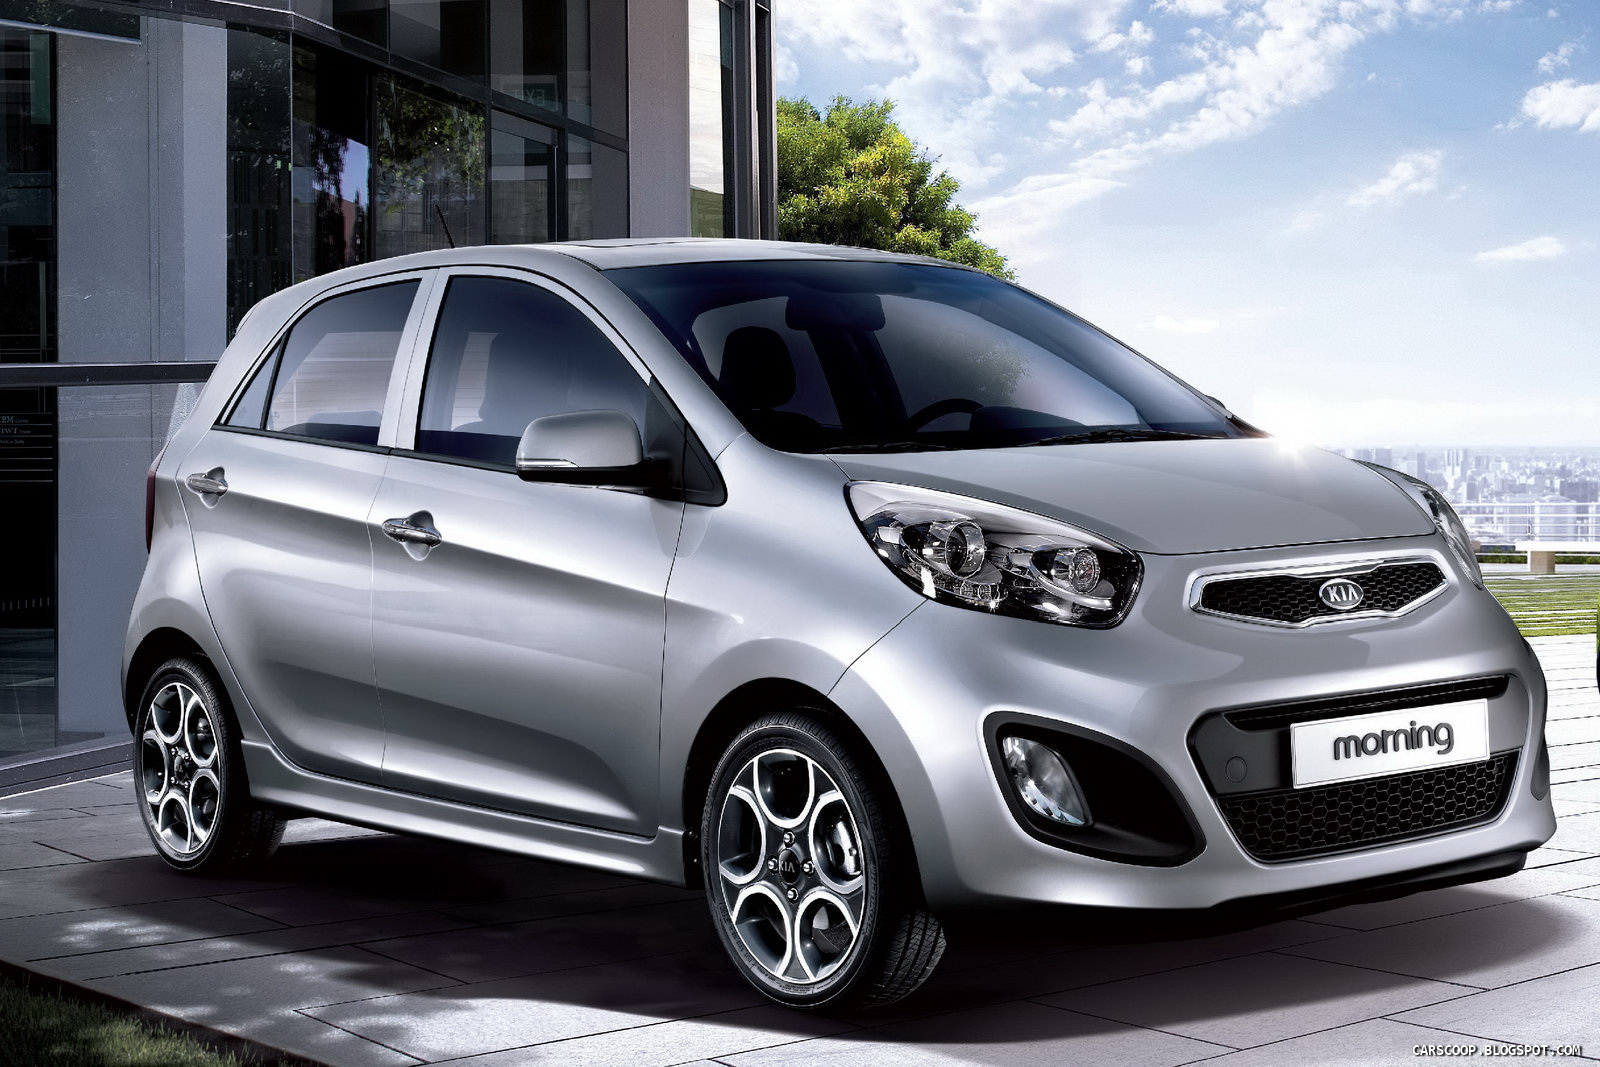 2012 Kia Picanto: HD Gallery and Official of South Korean Model | Carscoops